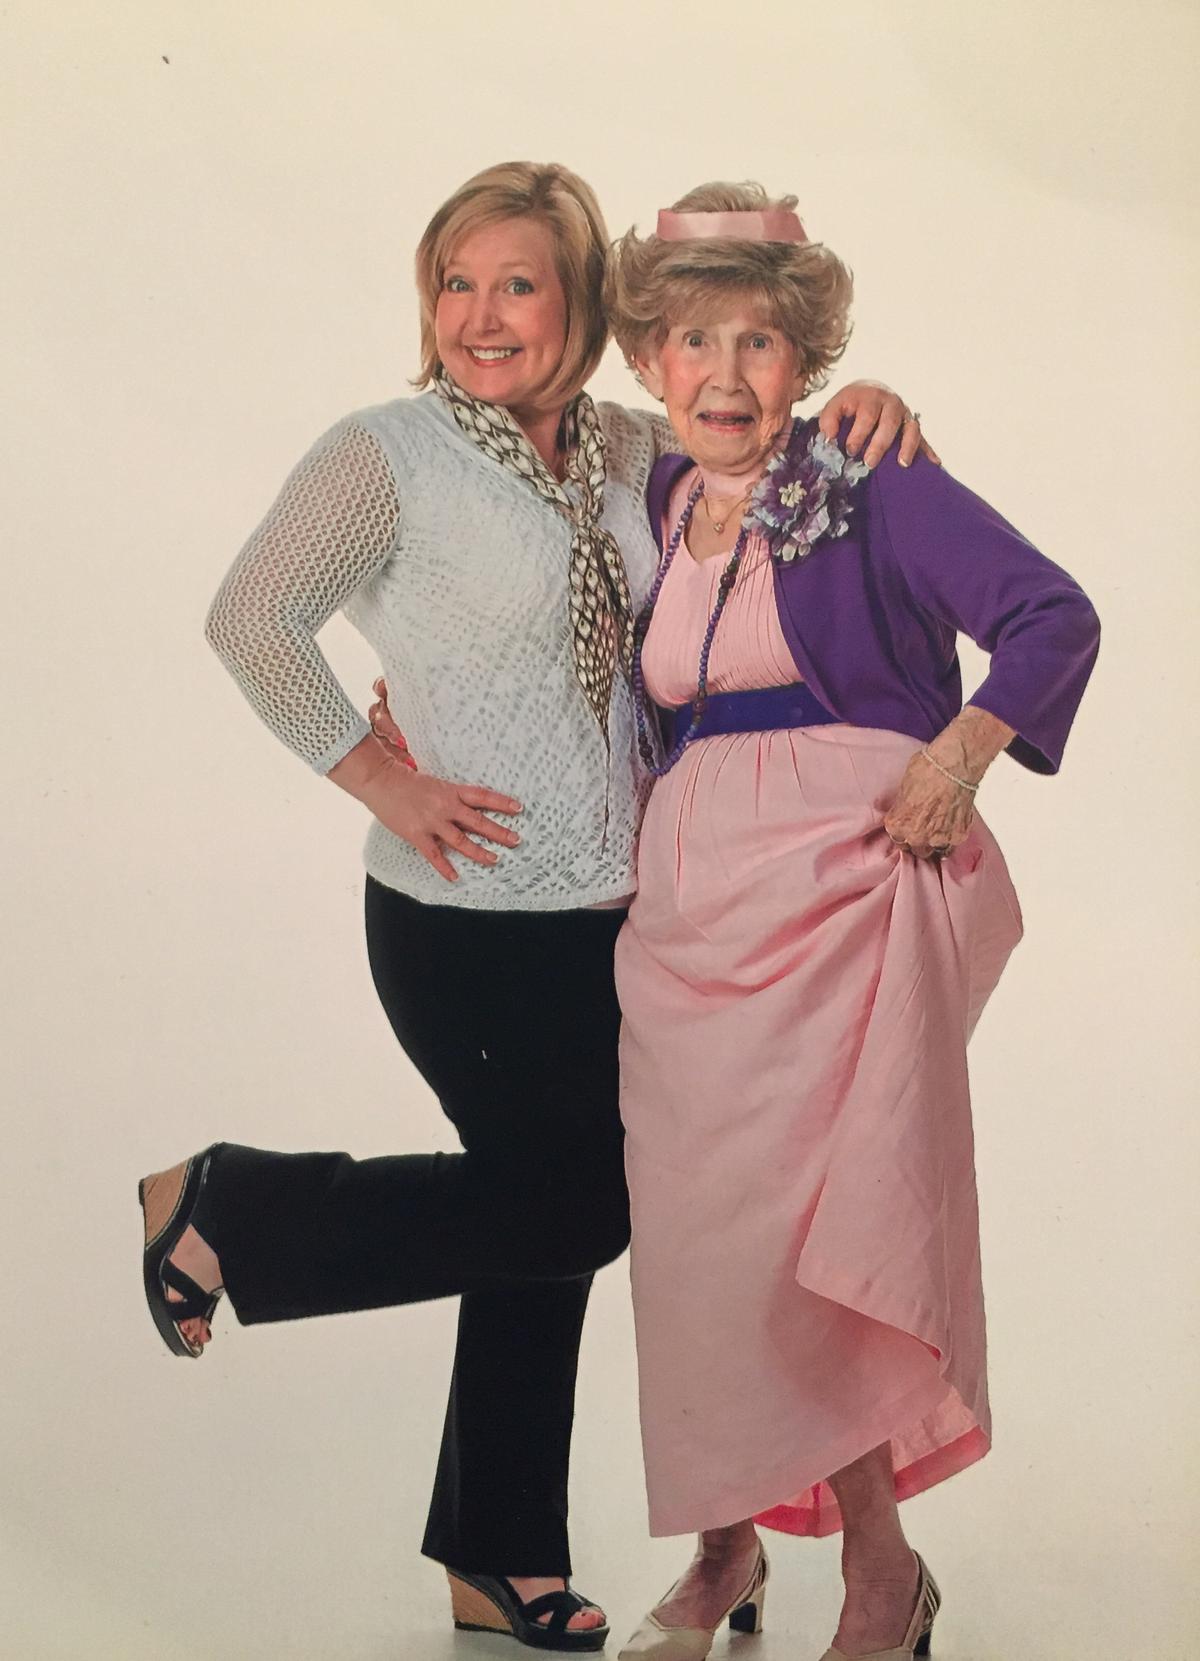 Lucille Fleming (R) was able to give Judy Gaman (L) important advice and perspective on life. (Courtesy of Judy Gaman)